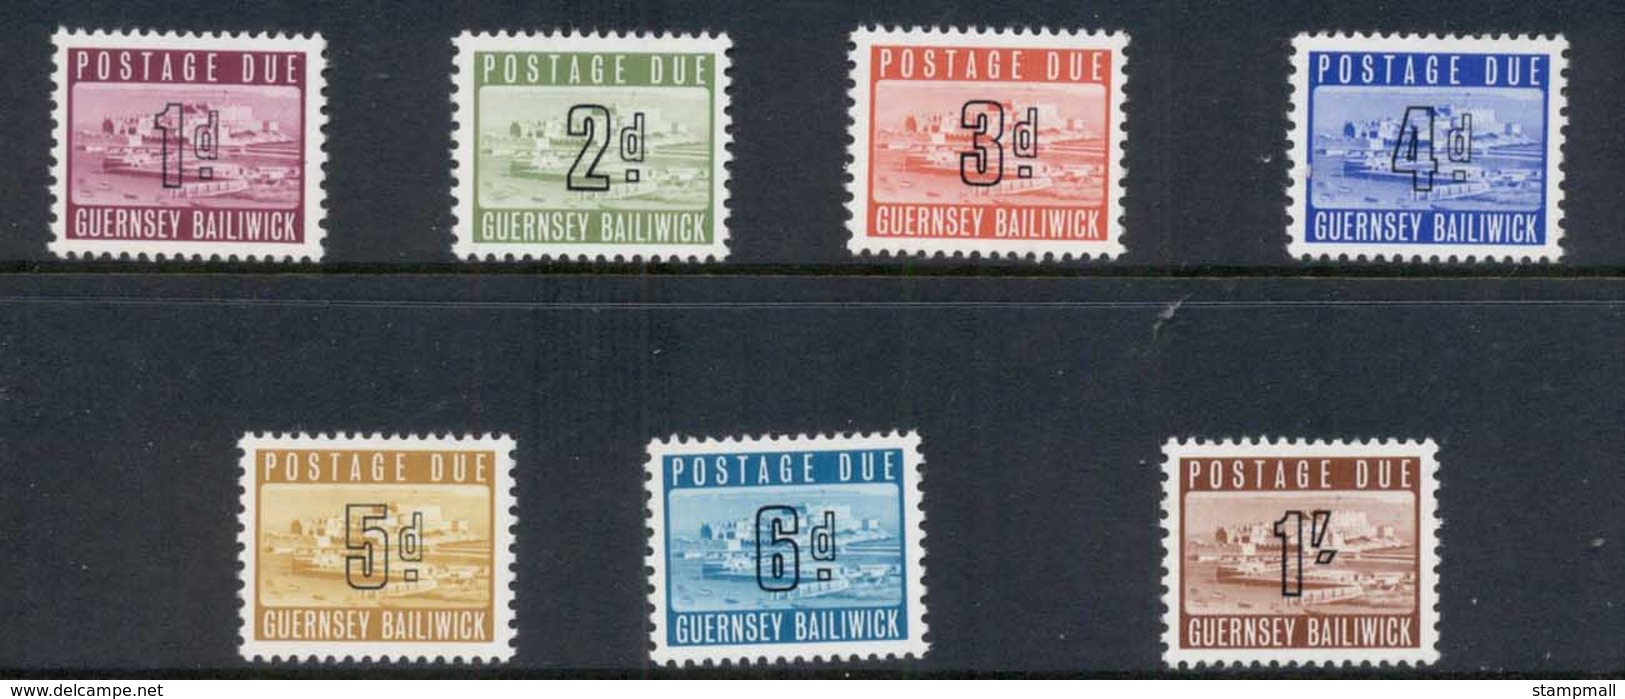 Guernsey 1969 Postage Dues MUH - Guernsey